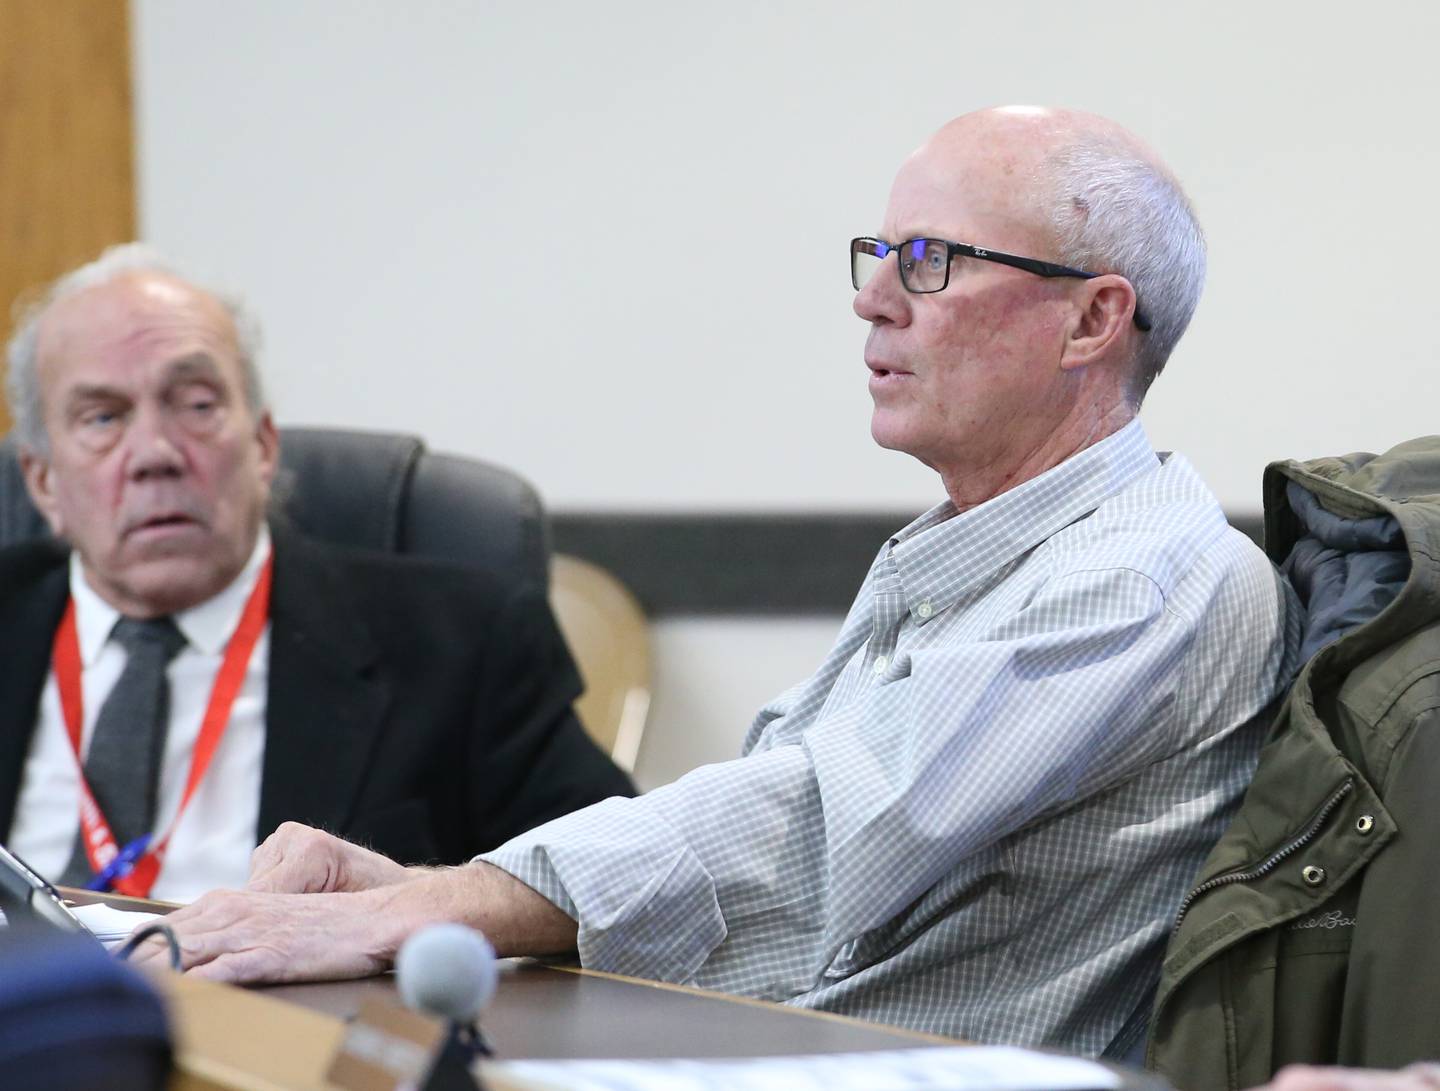 La Salle County Board member Gary Small (R), attends the County Board Meeting on Monday, Dec. 5, 2022 at the La Salle County Government Complex in Ottawa.